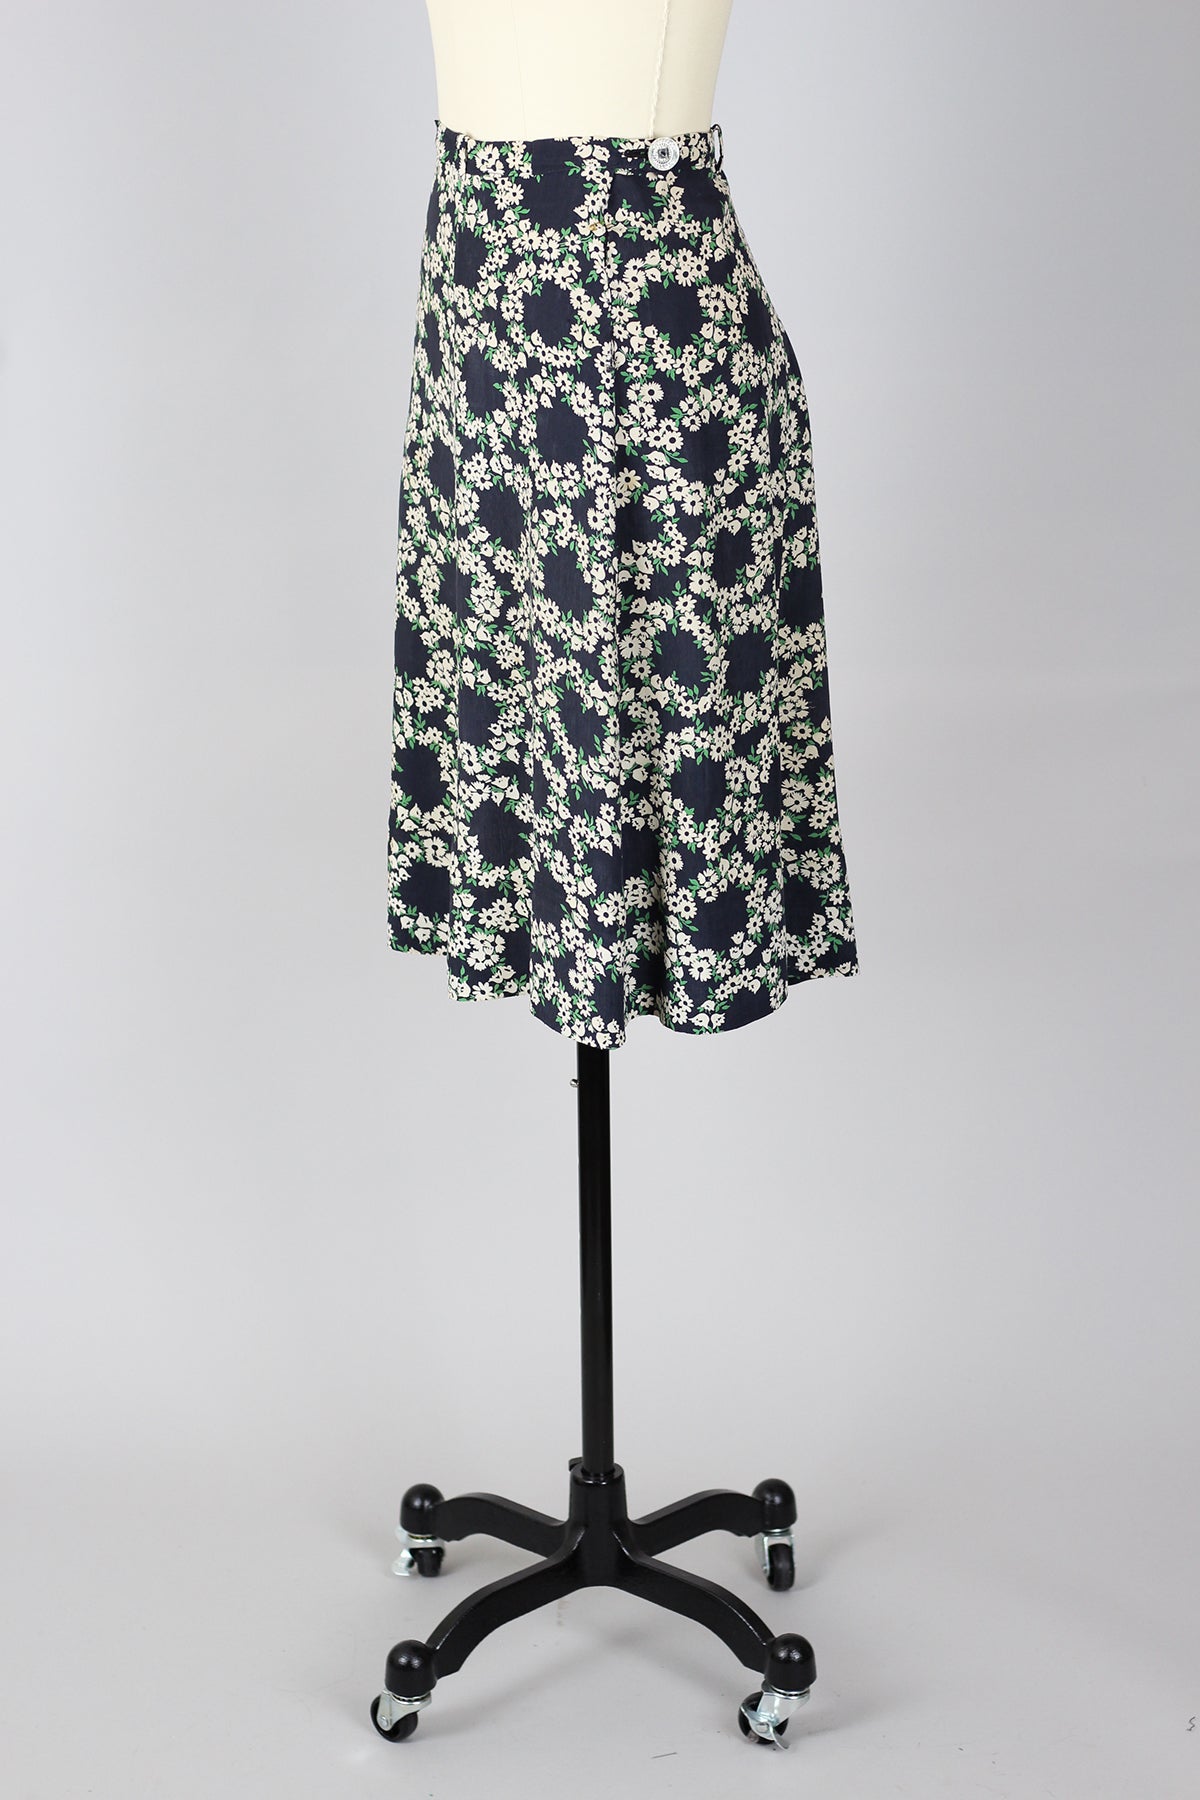 1920s Dropped Waist Rayon Floral Skirt